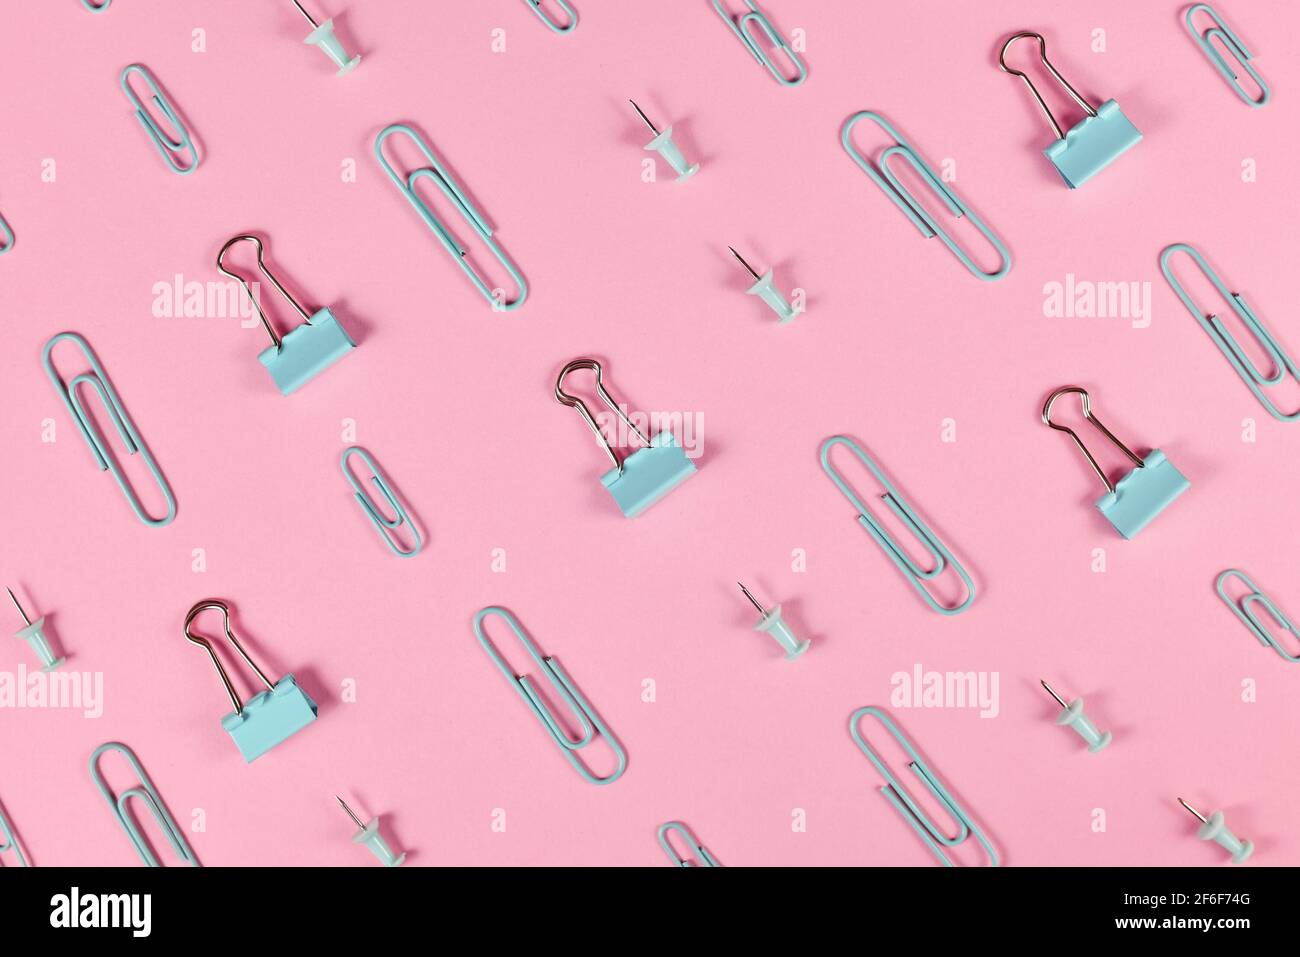 Stationery items like paper clips and drawing pins arranged on pink background Stock Photo